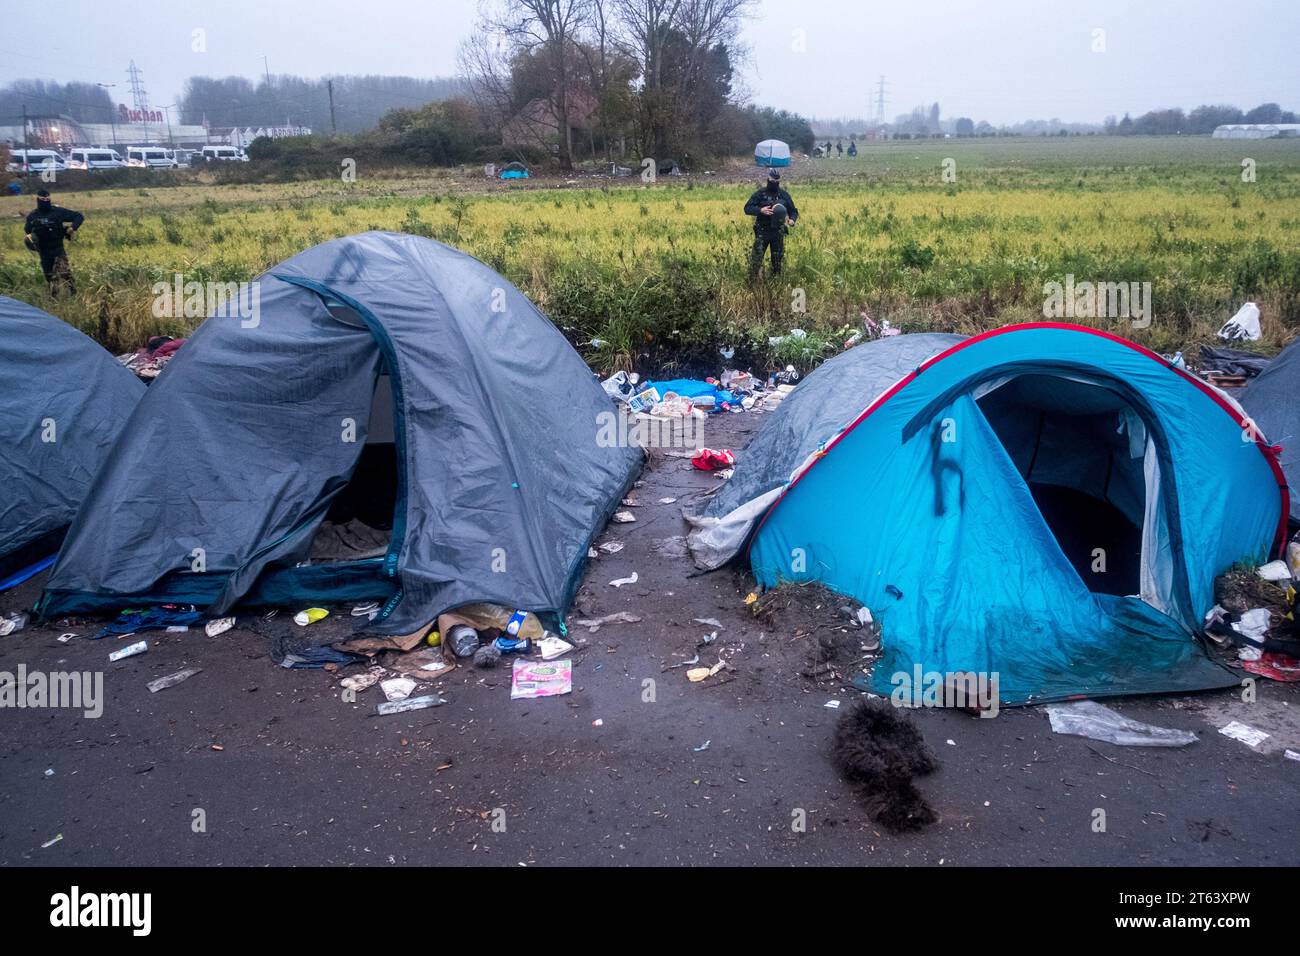 Michael Bunel/Le Pictorium - November 2016, Evacuation of the Calais 'Jungle - 16/11/2021 - France/Haut de France/Grande Synthe - The Dunkirk camp is cordoned off by the forces of law and order. Journalists on site this morning announced to the refugees that the camp was to be dismantled. The prefecture had promised to inform the exiles and associations 48 hours in advance. November 16, 2021. Grande Synthe. November 2016, the 'jungle' of Calais, the largest shantytown in Europe, was evacuated. Five years later, the exiles on the road to Great Britain are still there and camps a Stock Photo